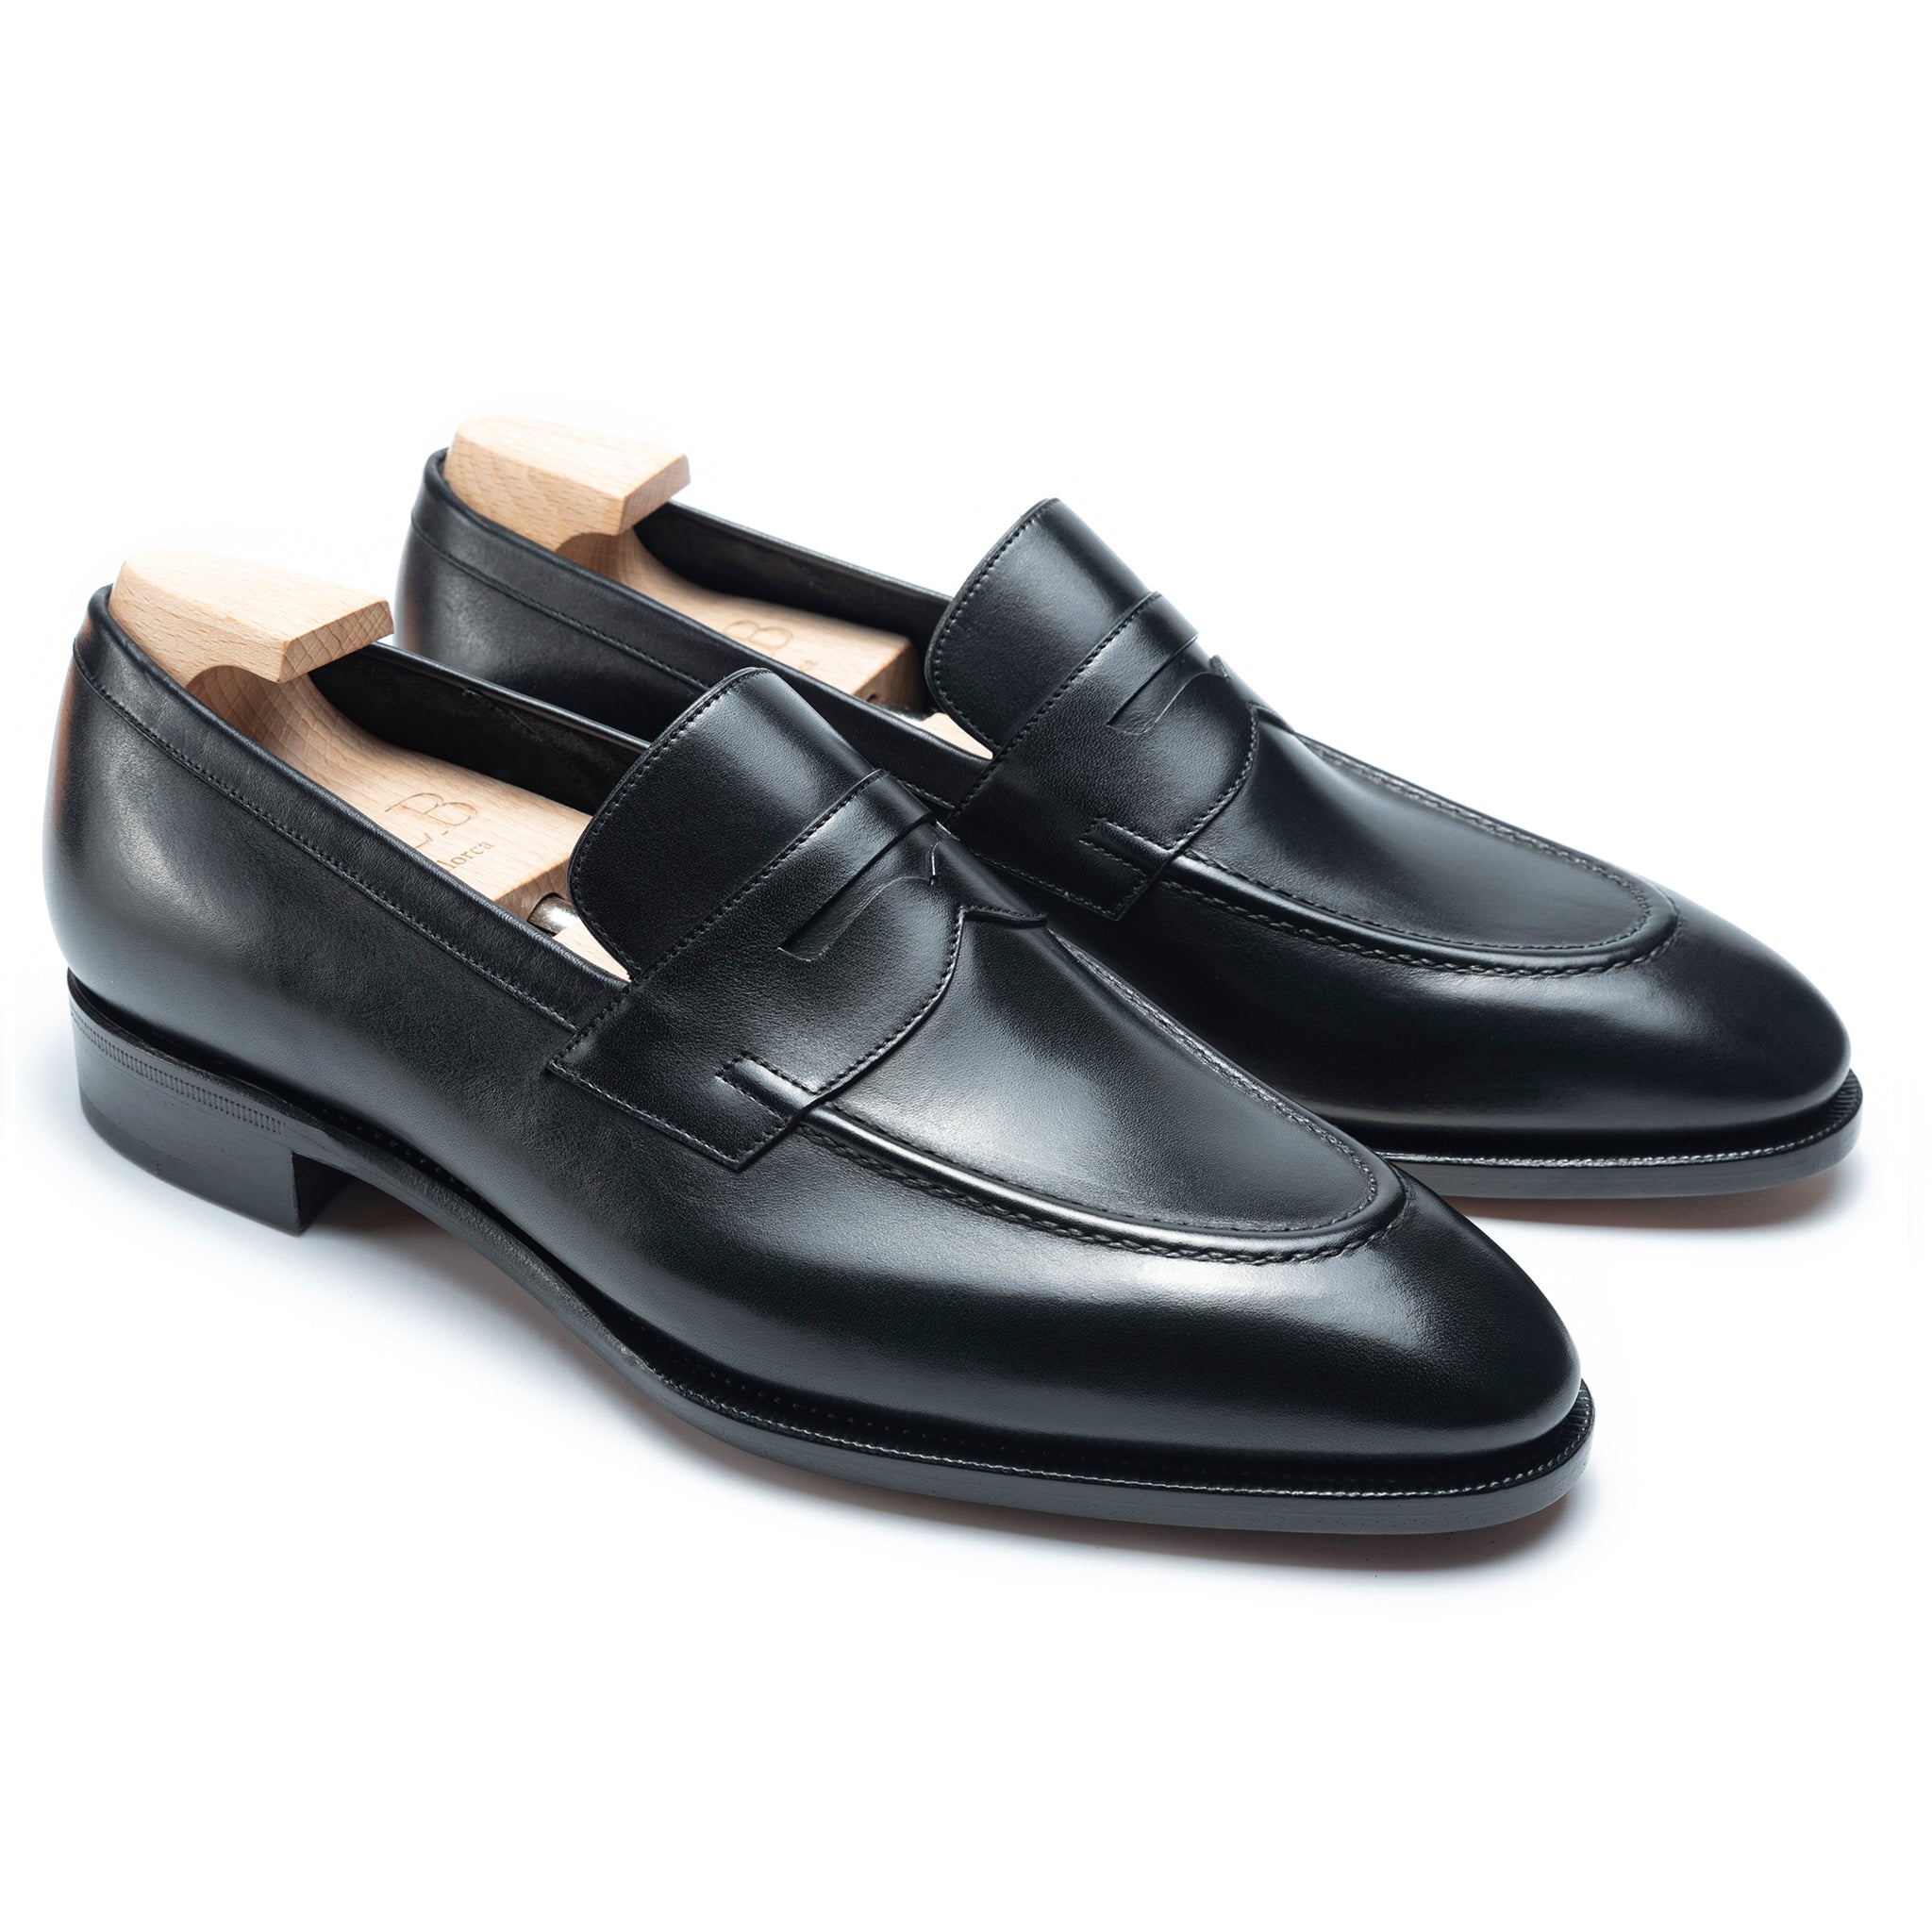 TLB Mallorca | Men's Leather loafers | Men's leather shoes | Goya ...